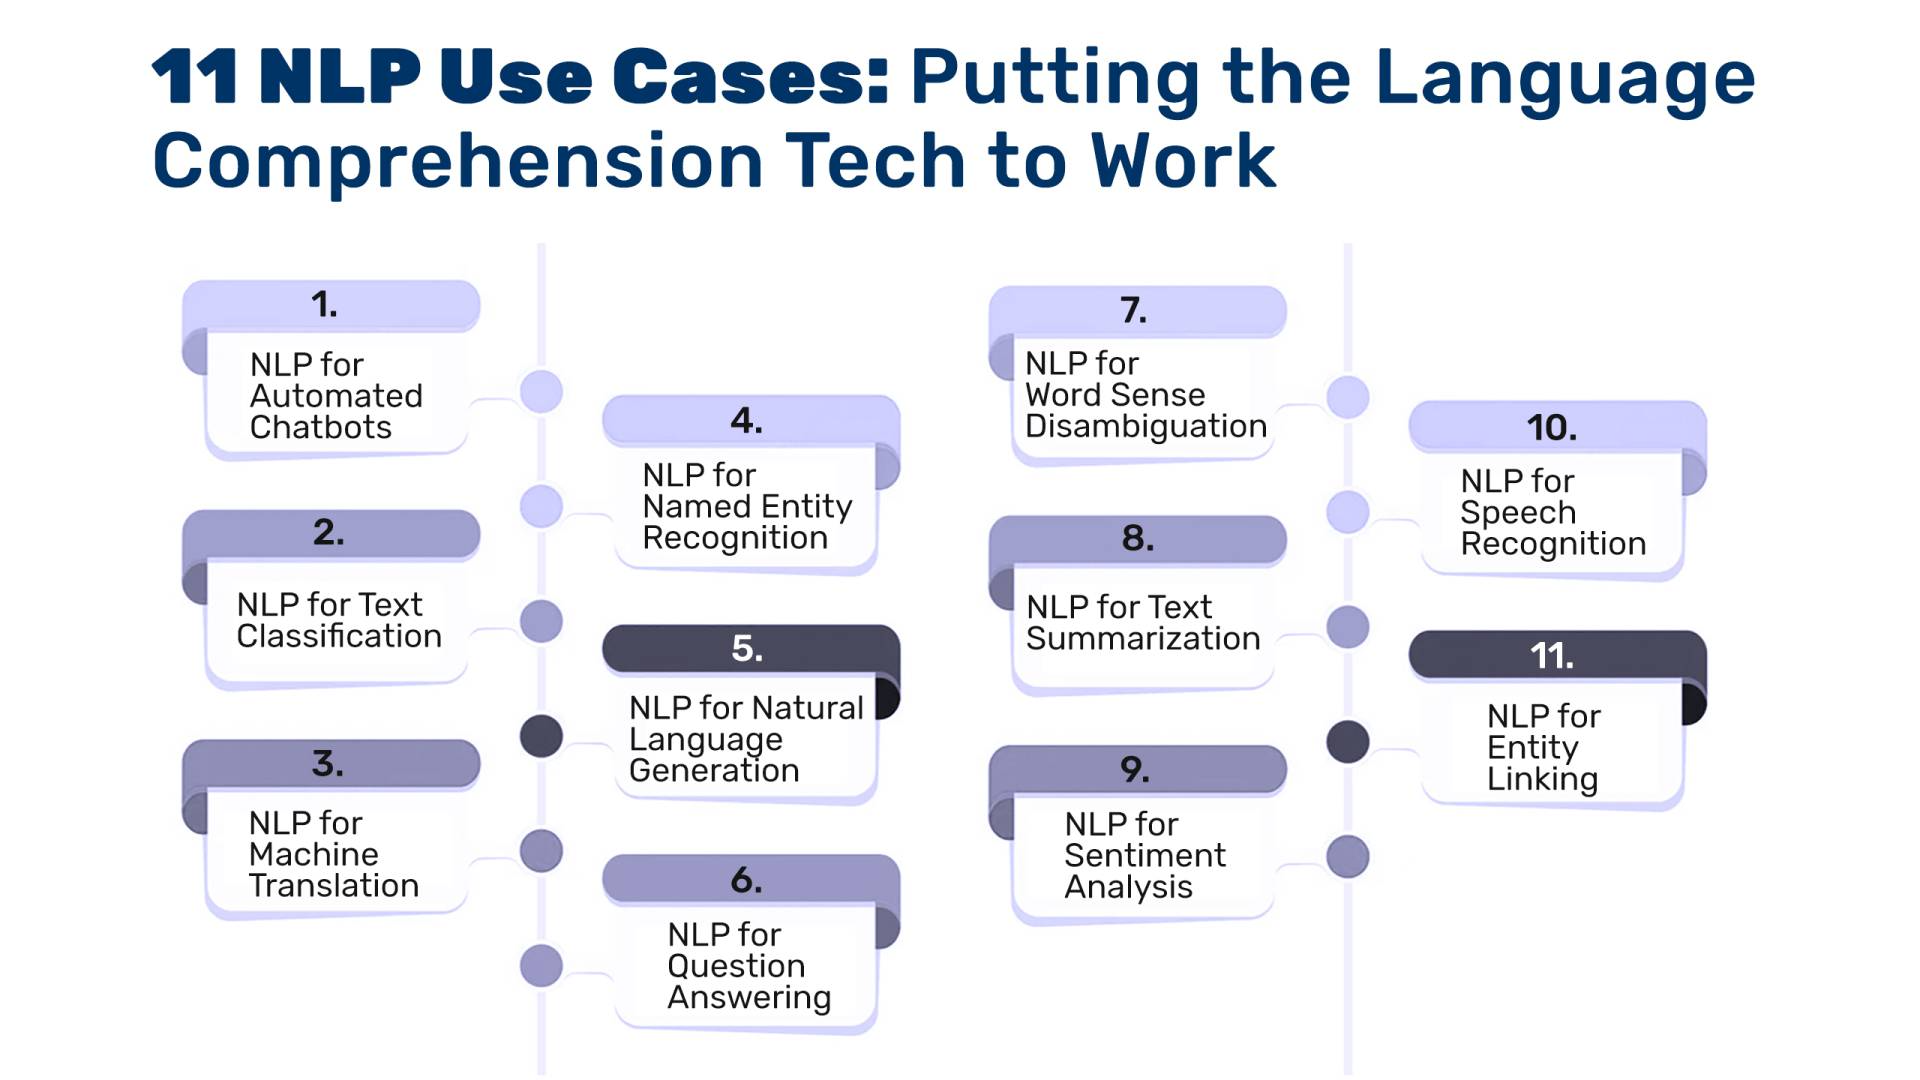 11 NLP Use Cases: Putting the Language Comprehension Tech to Work